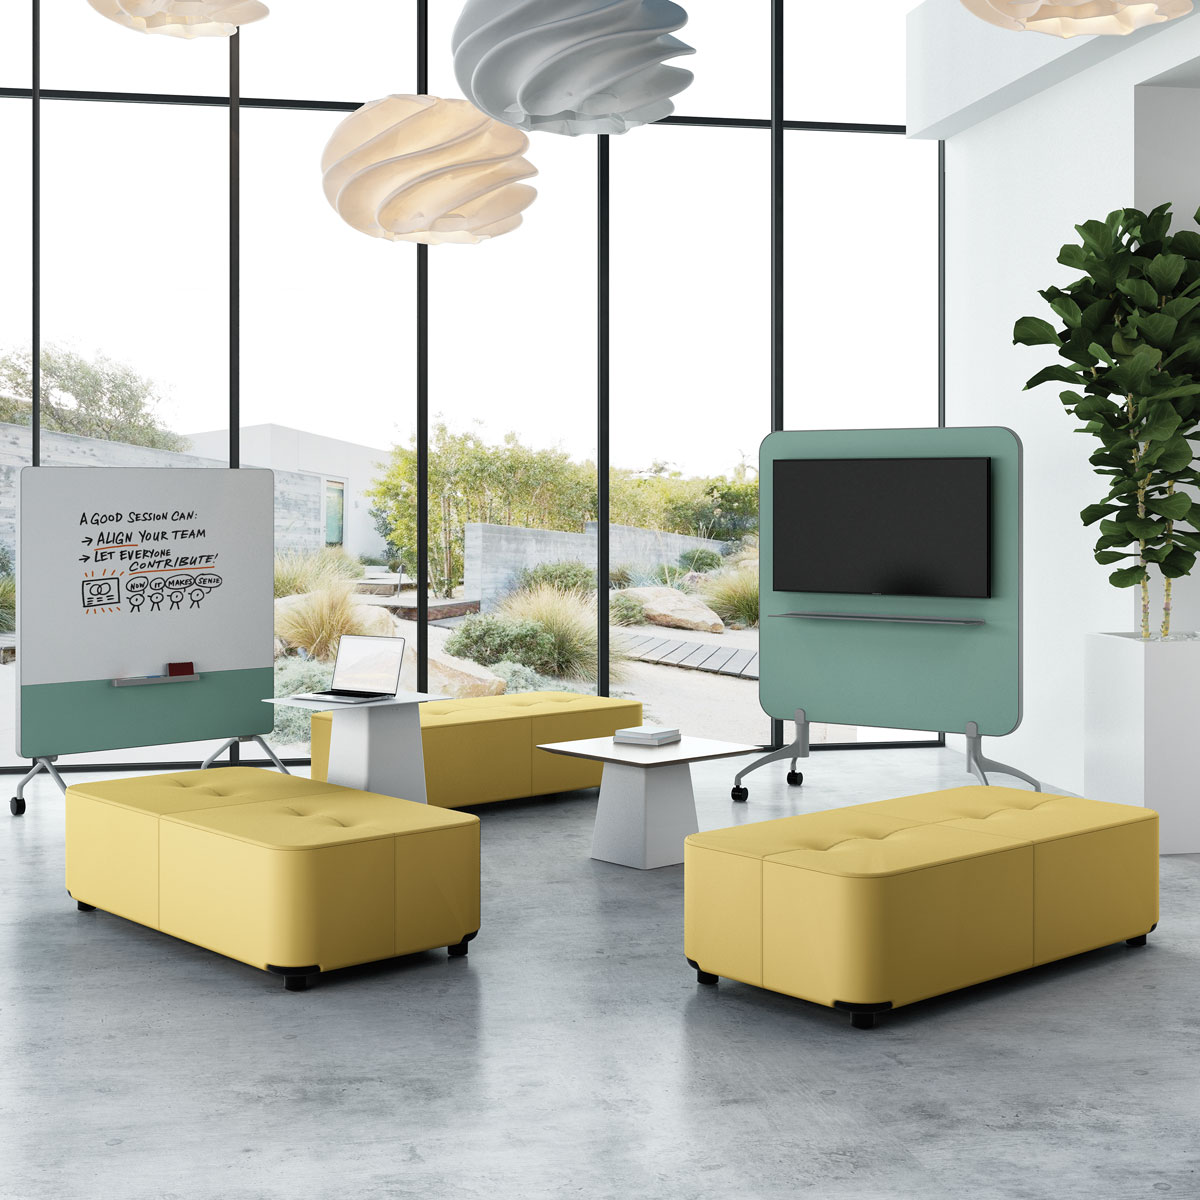 modu in yellow fabric with Zones mobile panel in an open discussion area